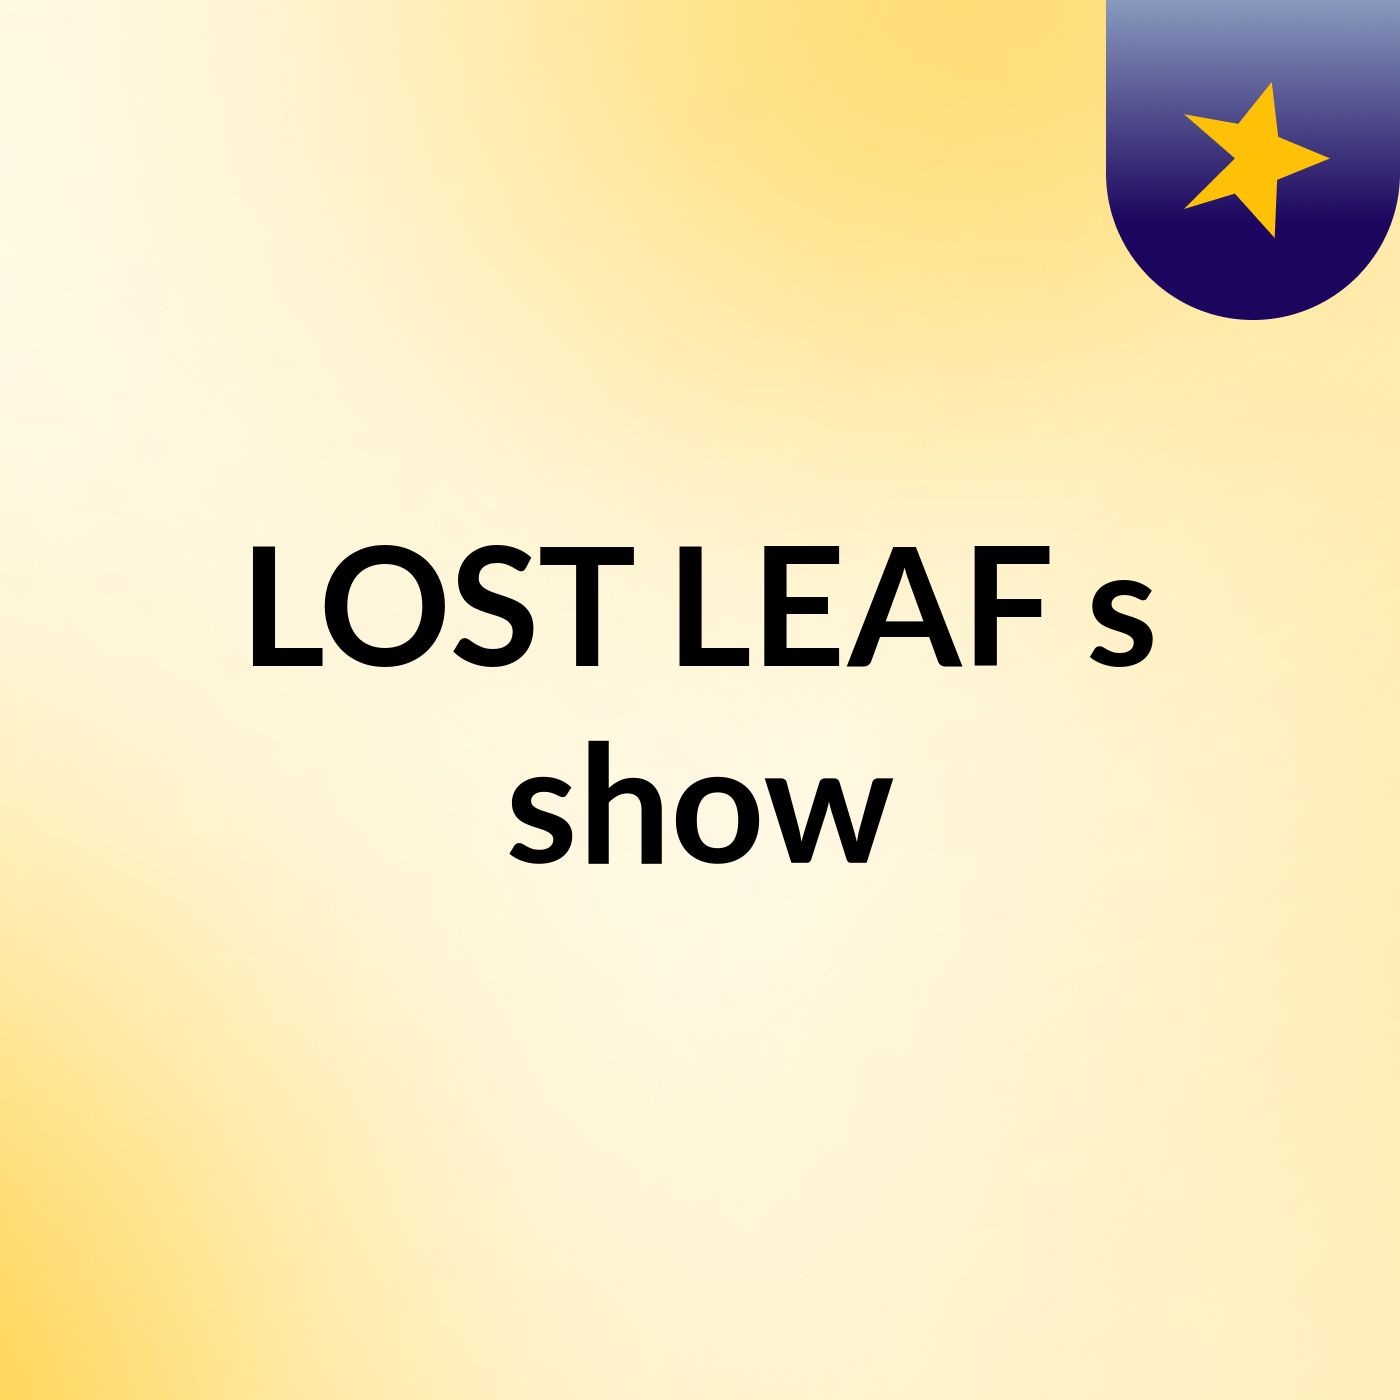 LOST LEAF's show